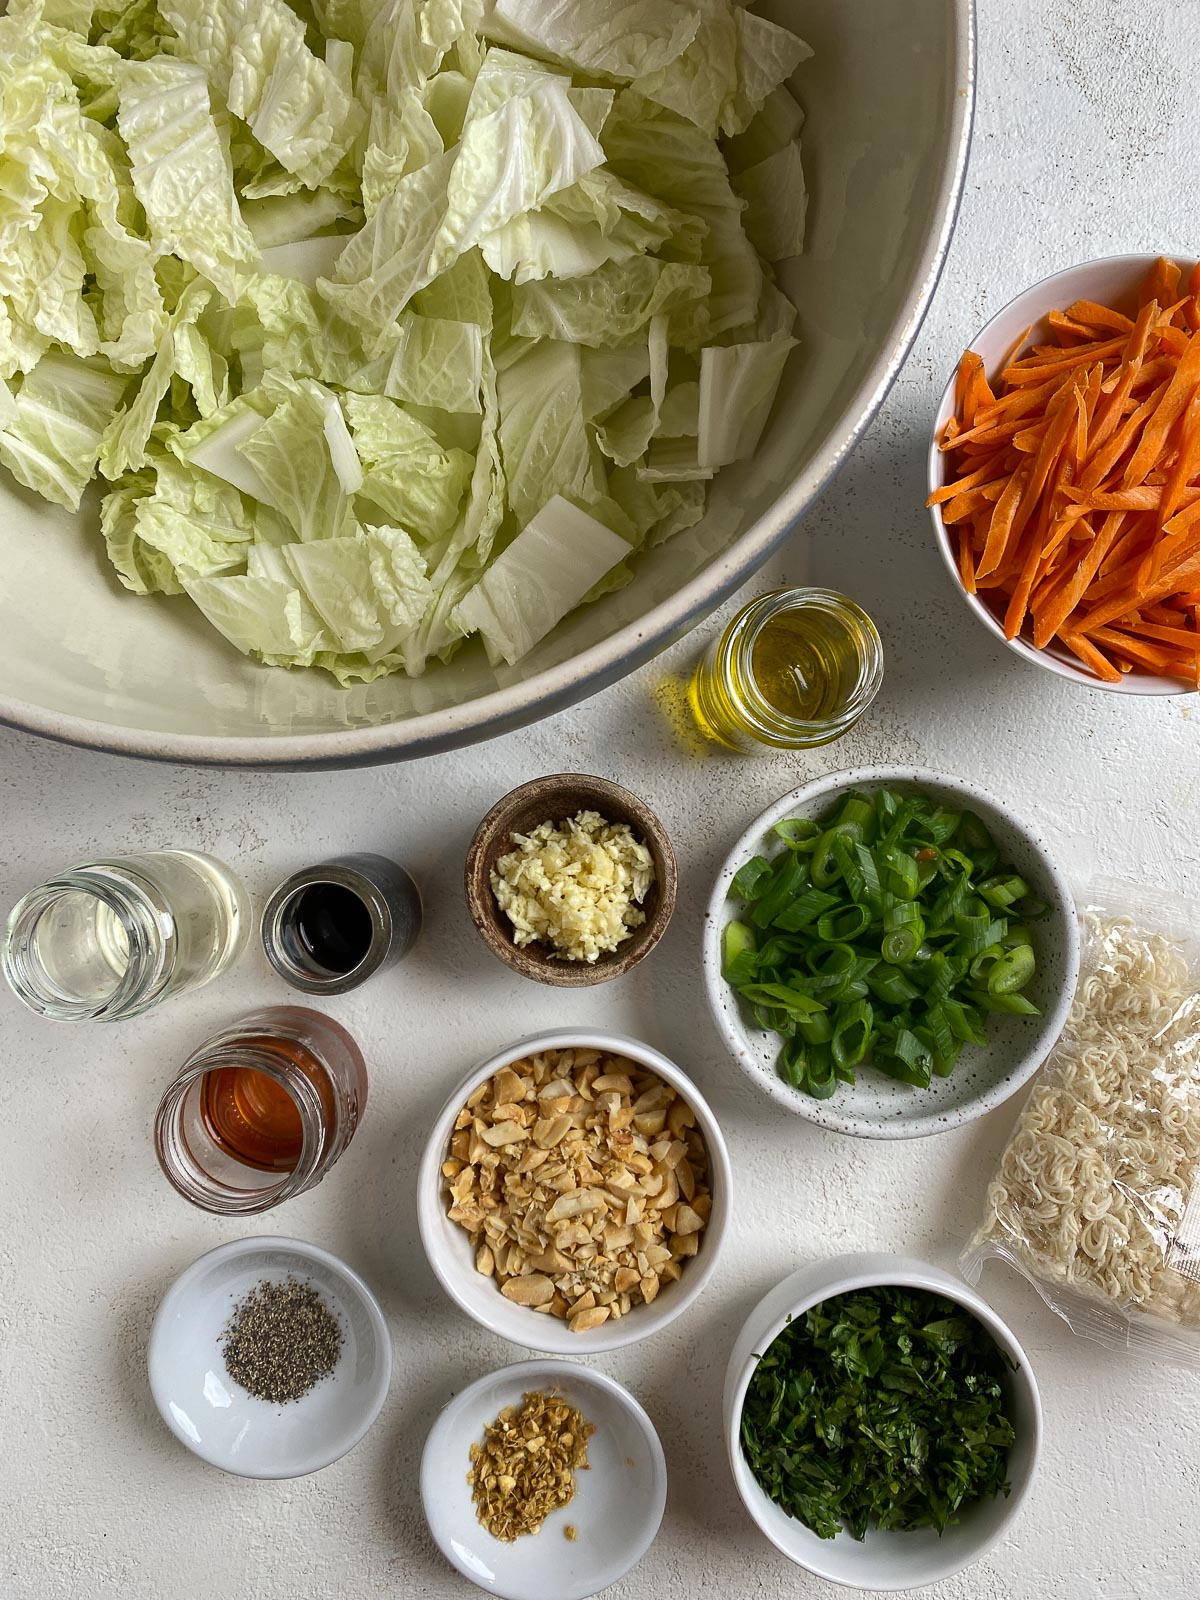 ingredients for Ramen Noodle Cabbage Salad measured out against a white surface